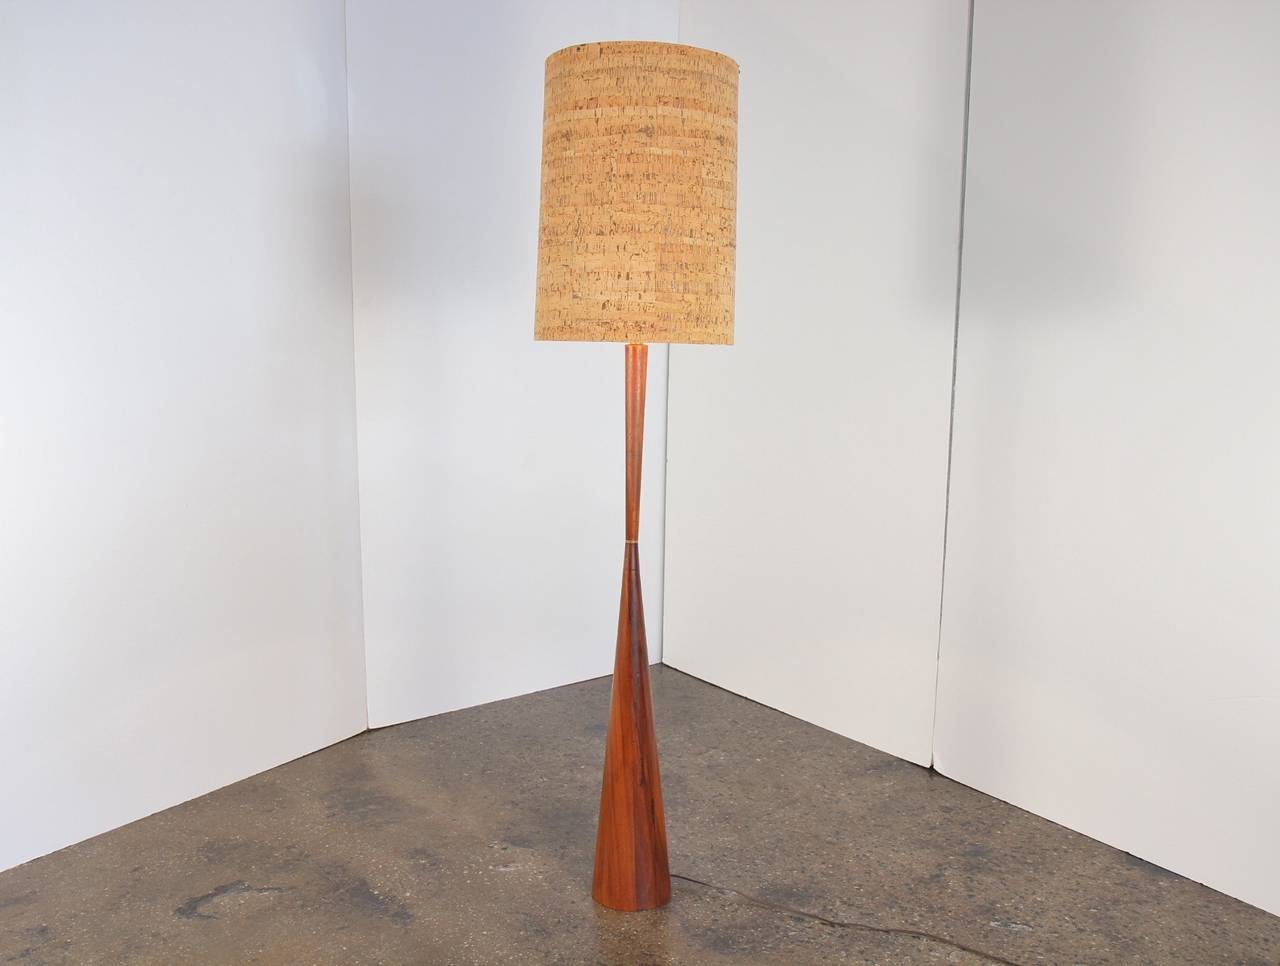 Large walnut floor lamp sports an amazing original cork shade. Brass detail is a nice touch, highlighting the tapered wood base, which is in the style of Phillip Lloyd Powell. 1950s. In excellent vintage condition.

65.5